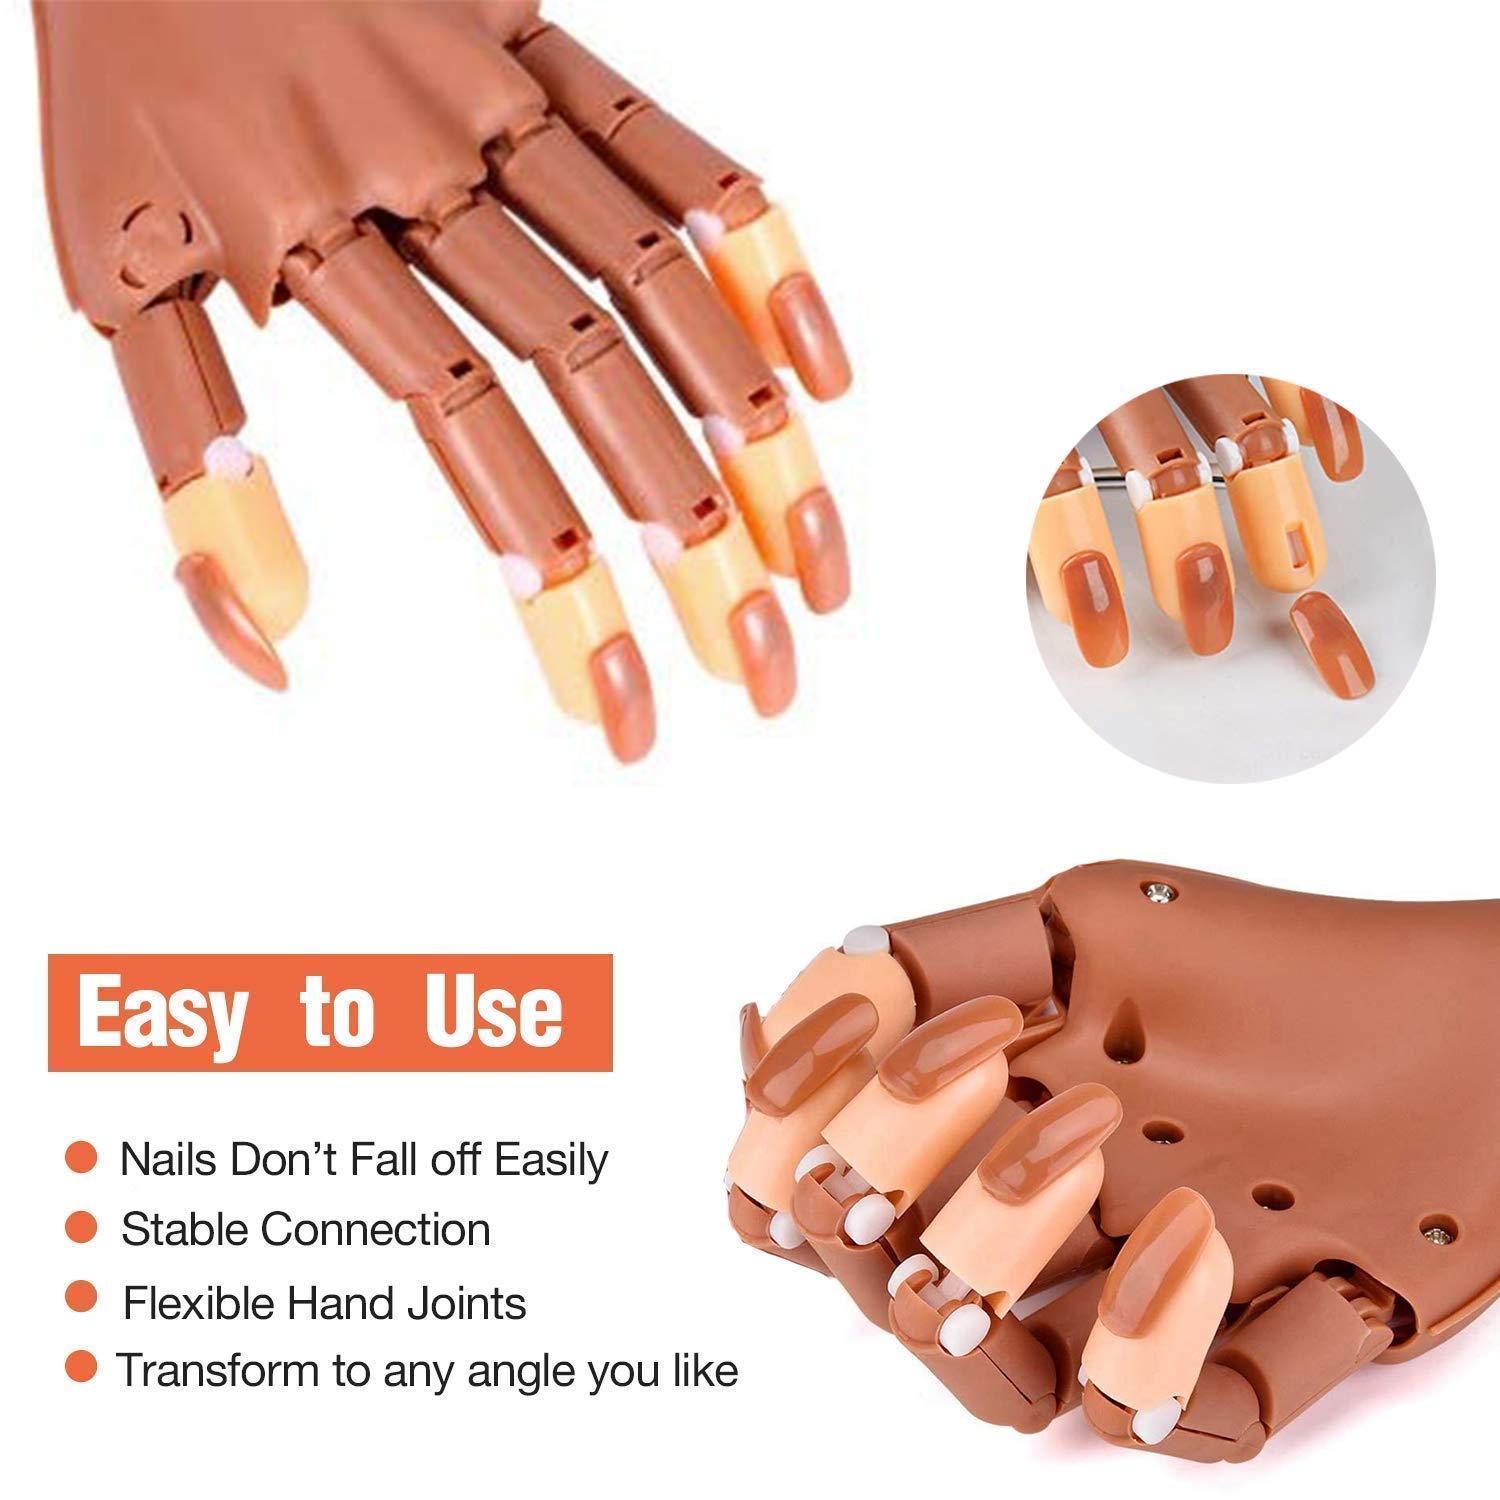 Nails Training Hand for Acrylic Nail, Flexible Movable Fake Model Hands for  Nails Manicure, Acrylic Nail Technician Manicure Supply, Best Manicure DIY  Print Practice Tool (B-Nail Training Hand Set) 112 Piece Set